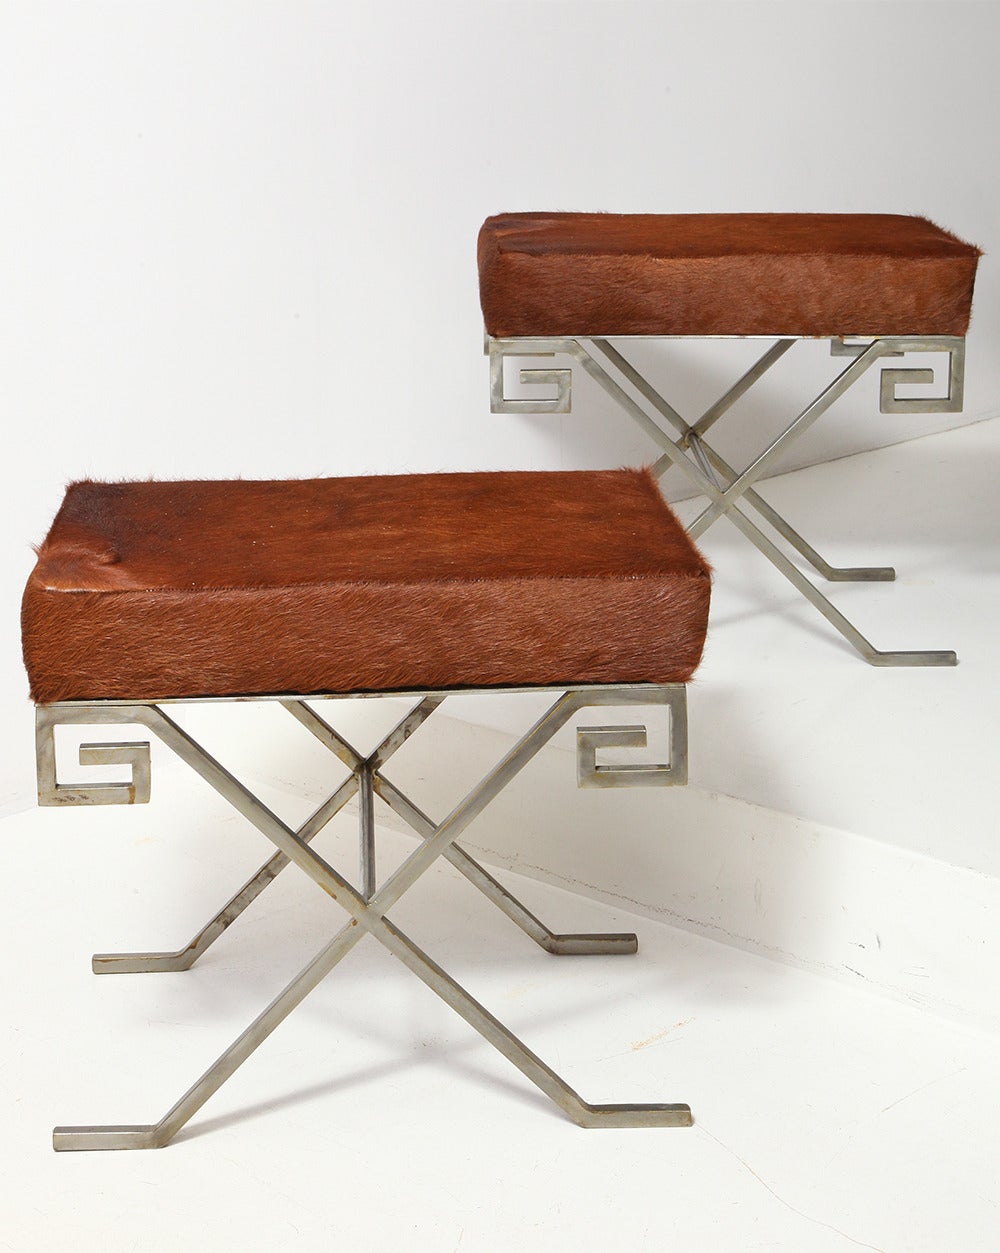 Pair of X-based stools or benches in polished steel with Greek key motif and upholstered pony skin seats.
French, circa 1950.